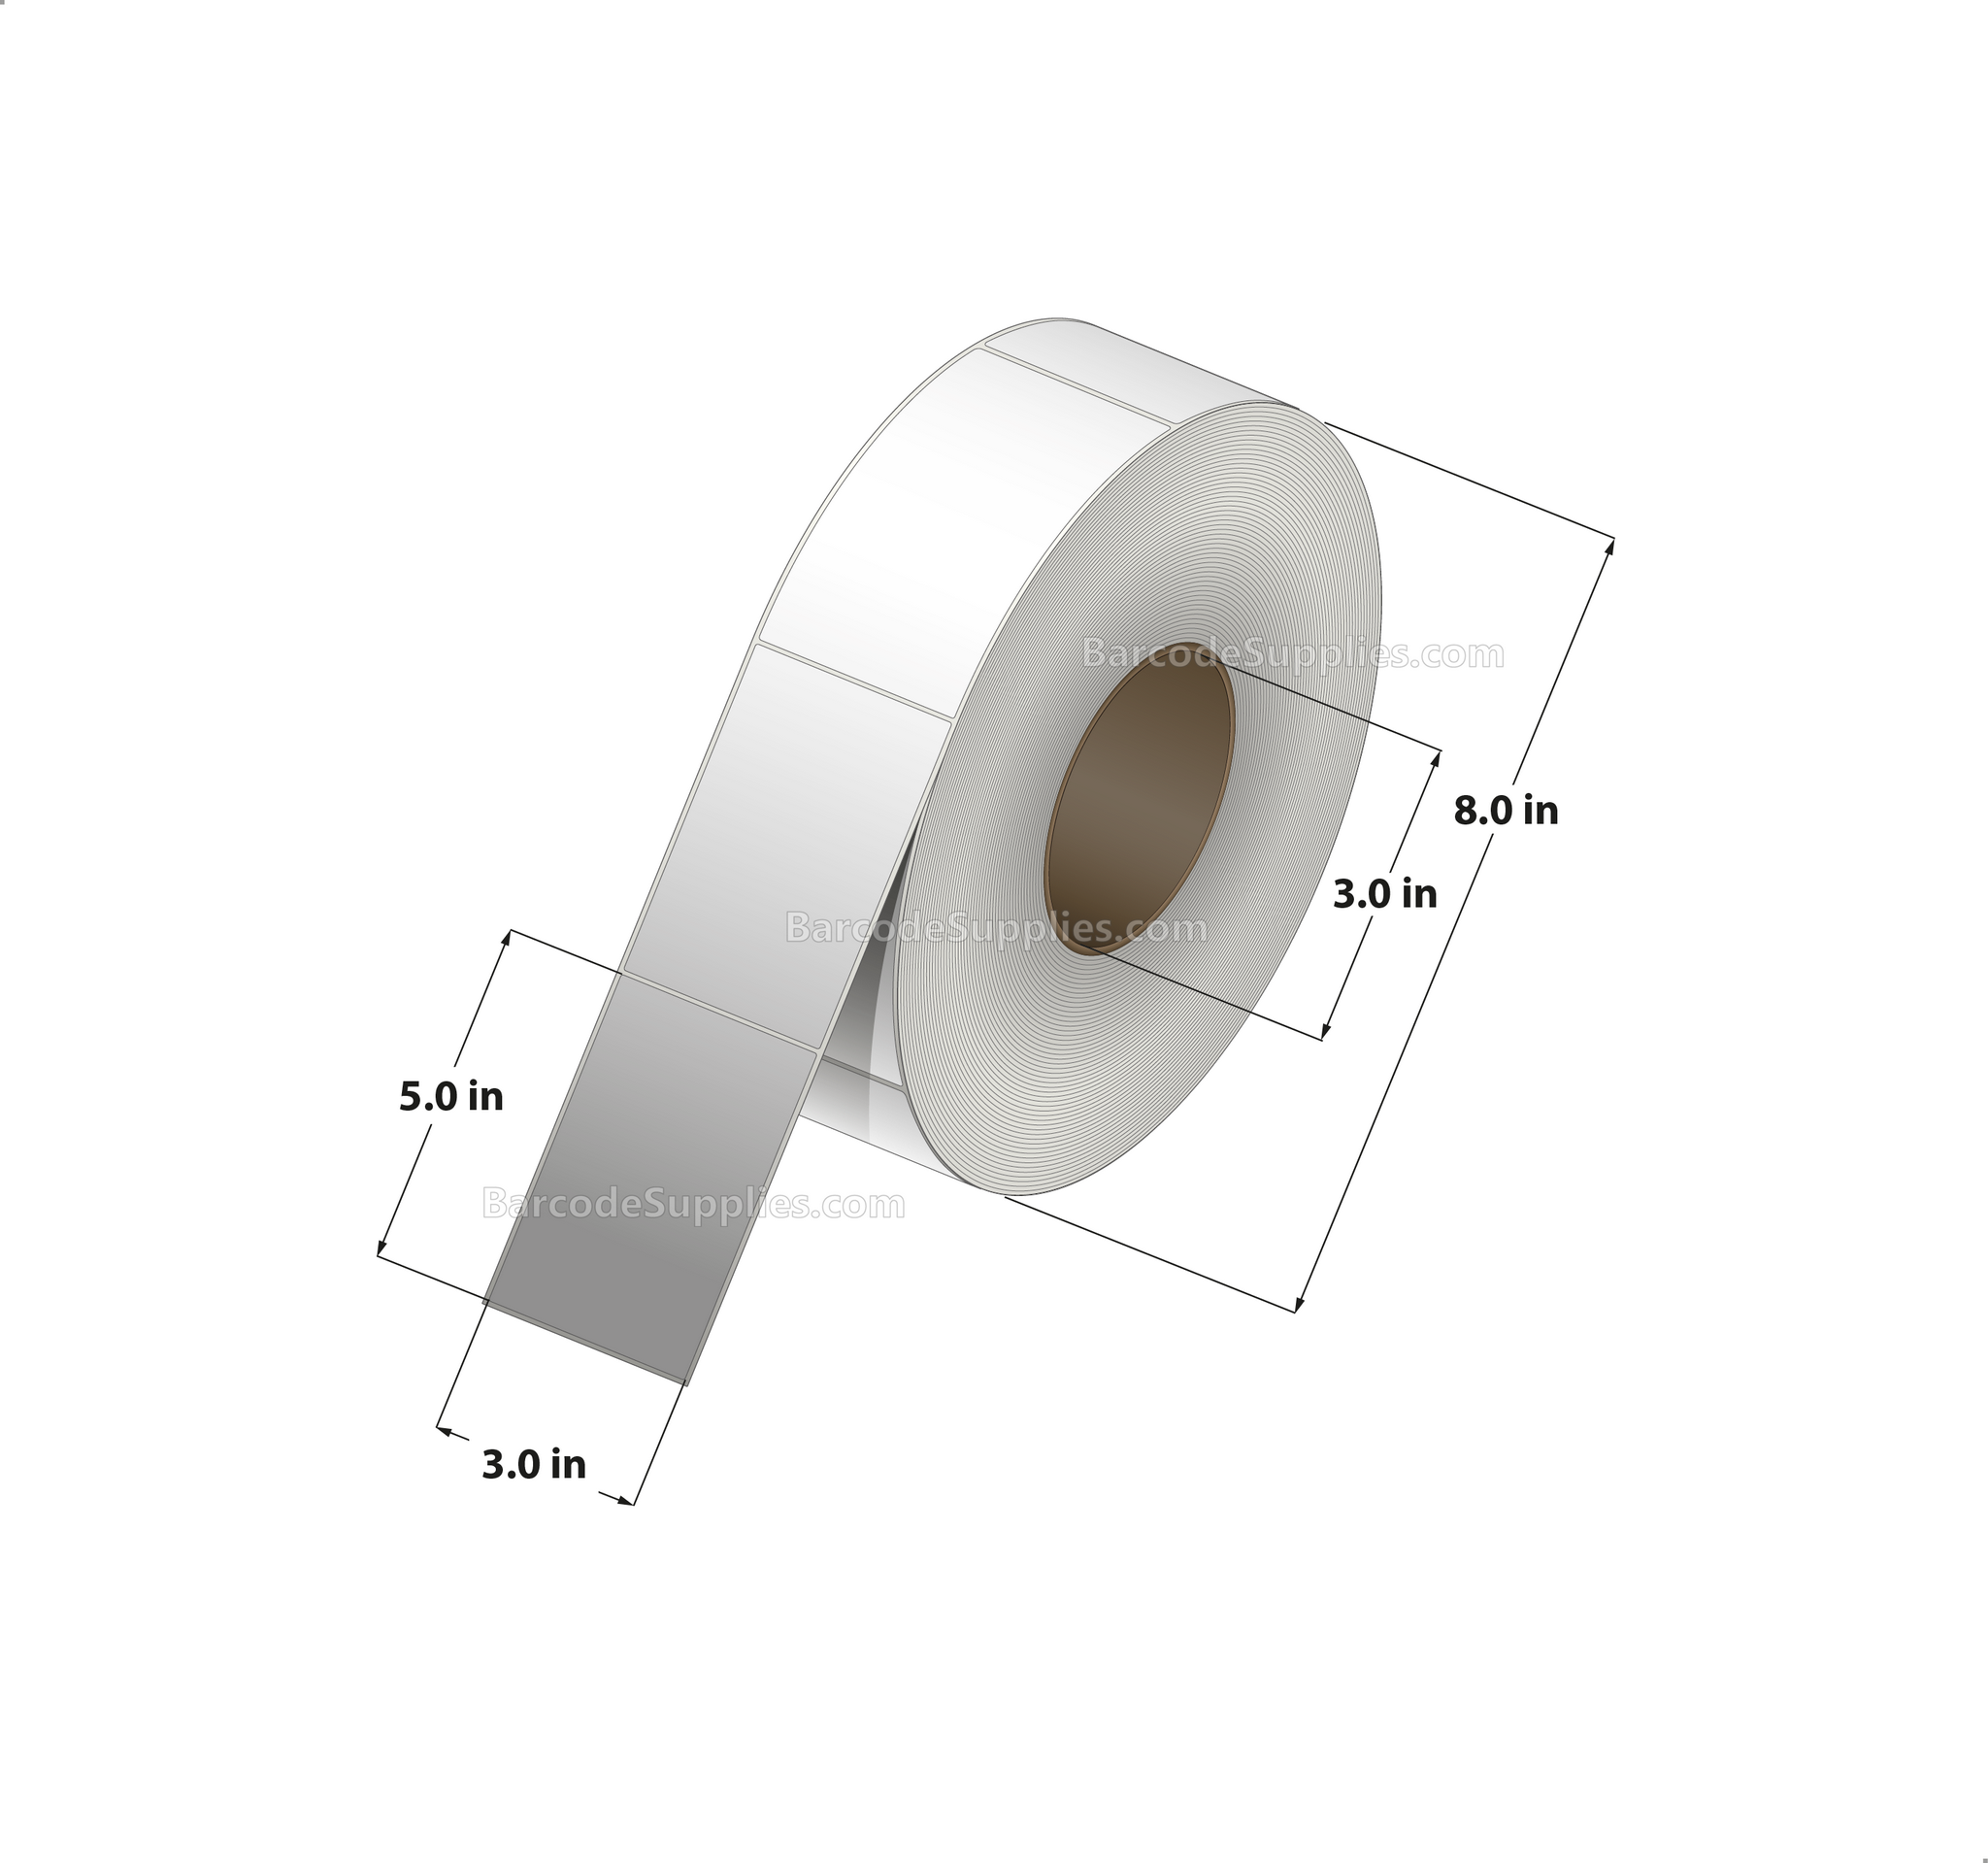 3 x 5 Thermal Transfer White Labels With Rubber Adhesive - No Perforation - 1300 Labels Per Roll - Carton Of 6 Rolls - 7800 Labels Total - MPN: CTT300500-3